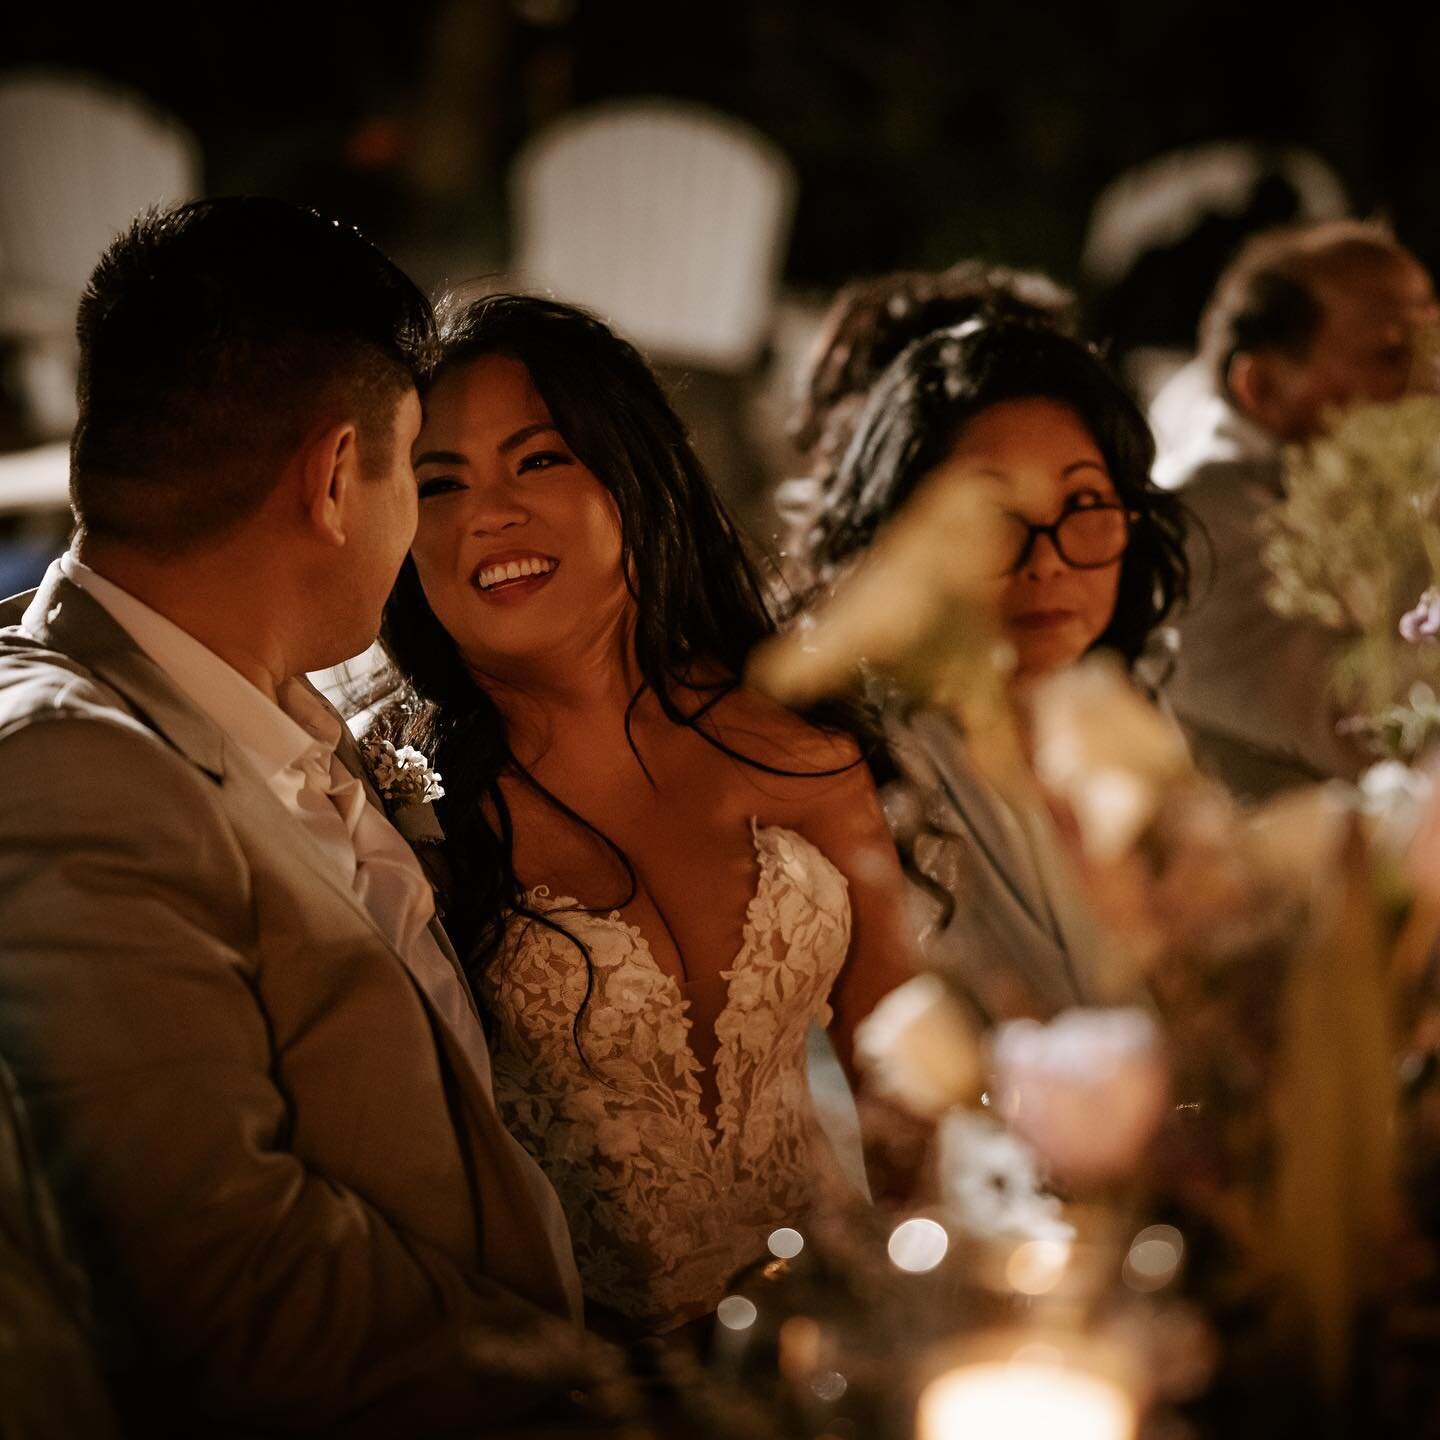 Candice + Kevin

Bride: @candzp
Groom: @kwu1110
Photography + Film: @the_wild_eyed
Planner/Designer: @micromiami 
Venue: Chateau de la Mer by @beachhousesinparadise 
Hair + Makeup: @kaylaanne_flores
Live Musicians/Entertainment: @cat_carlos_live
Flor